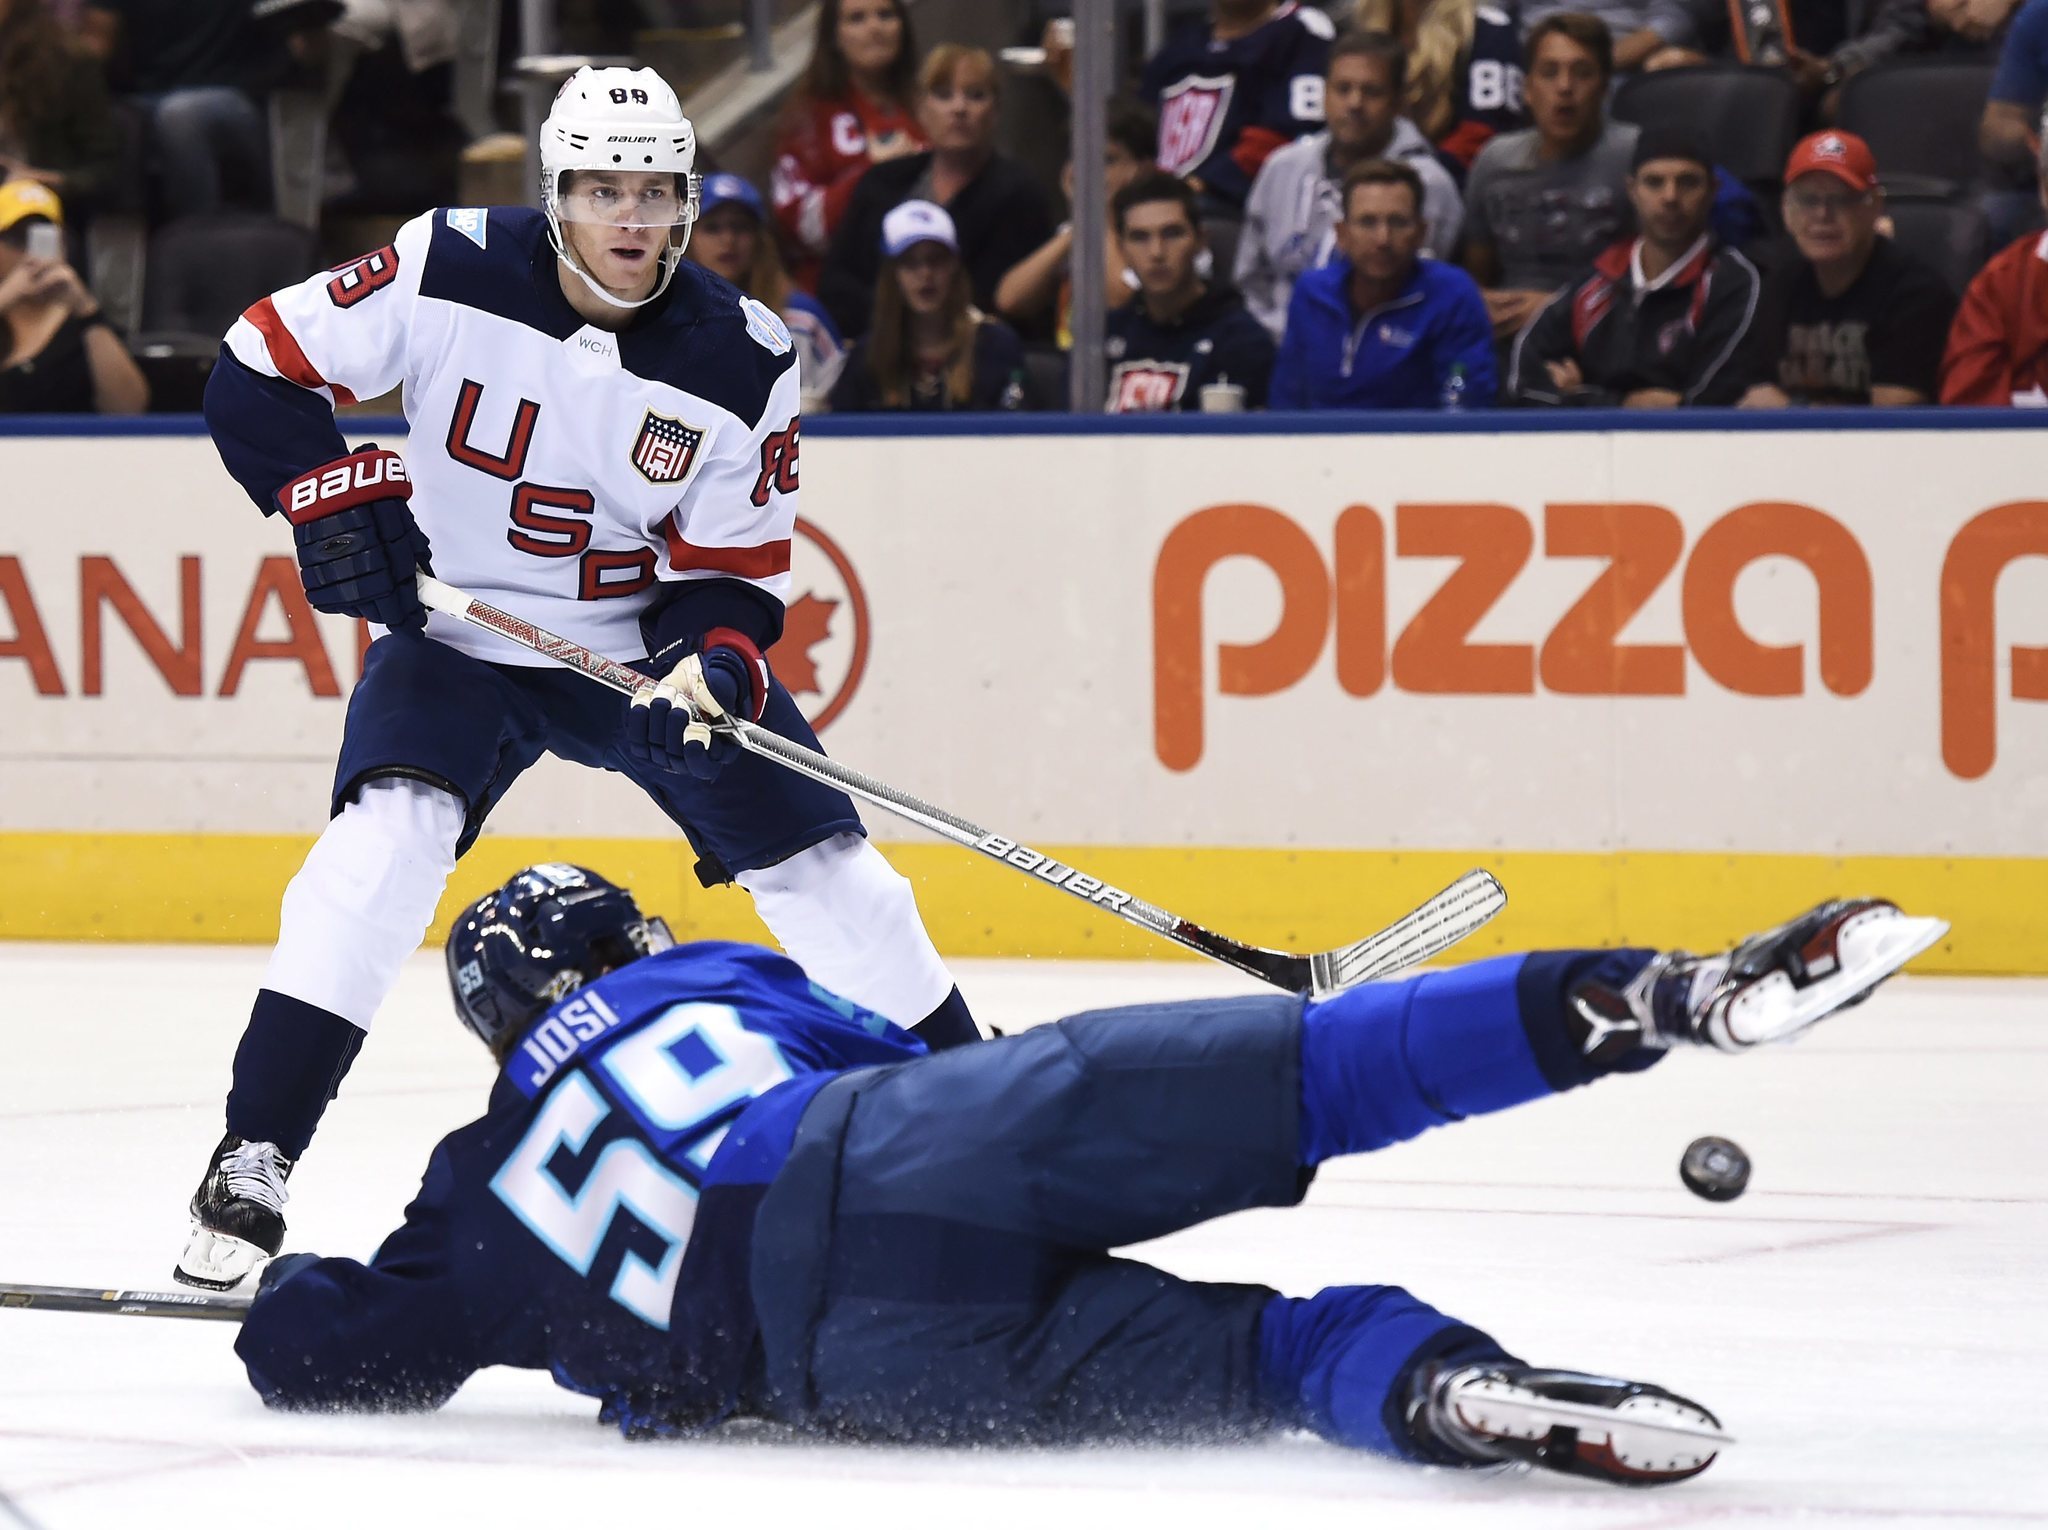 Stunning U.S. loss to Europe shows need for Patrick Kane to take control - Chicago Tribune2048 x 1530